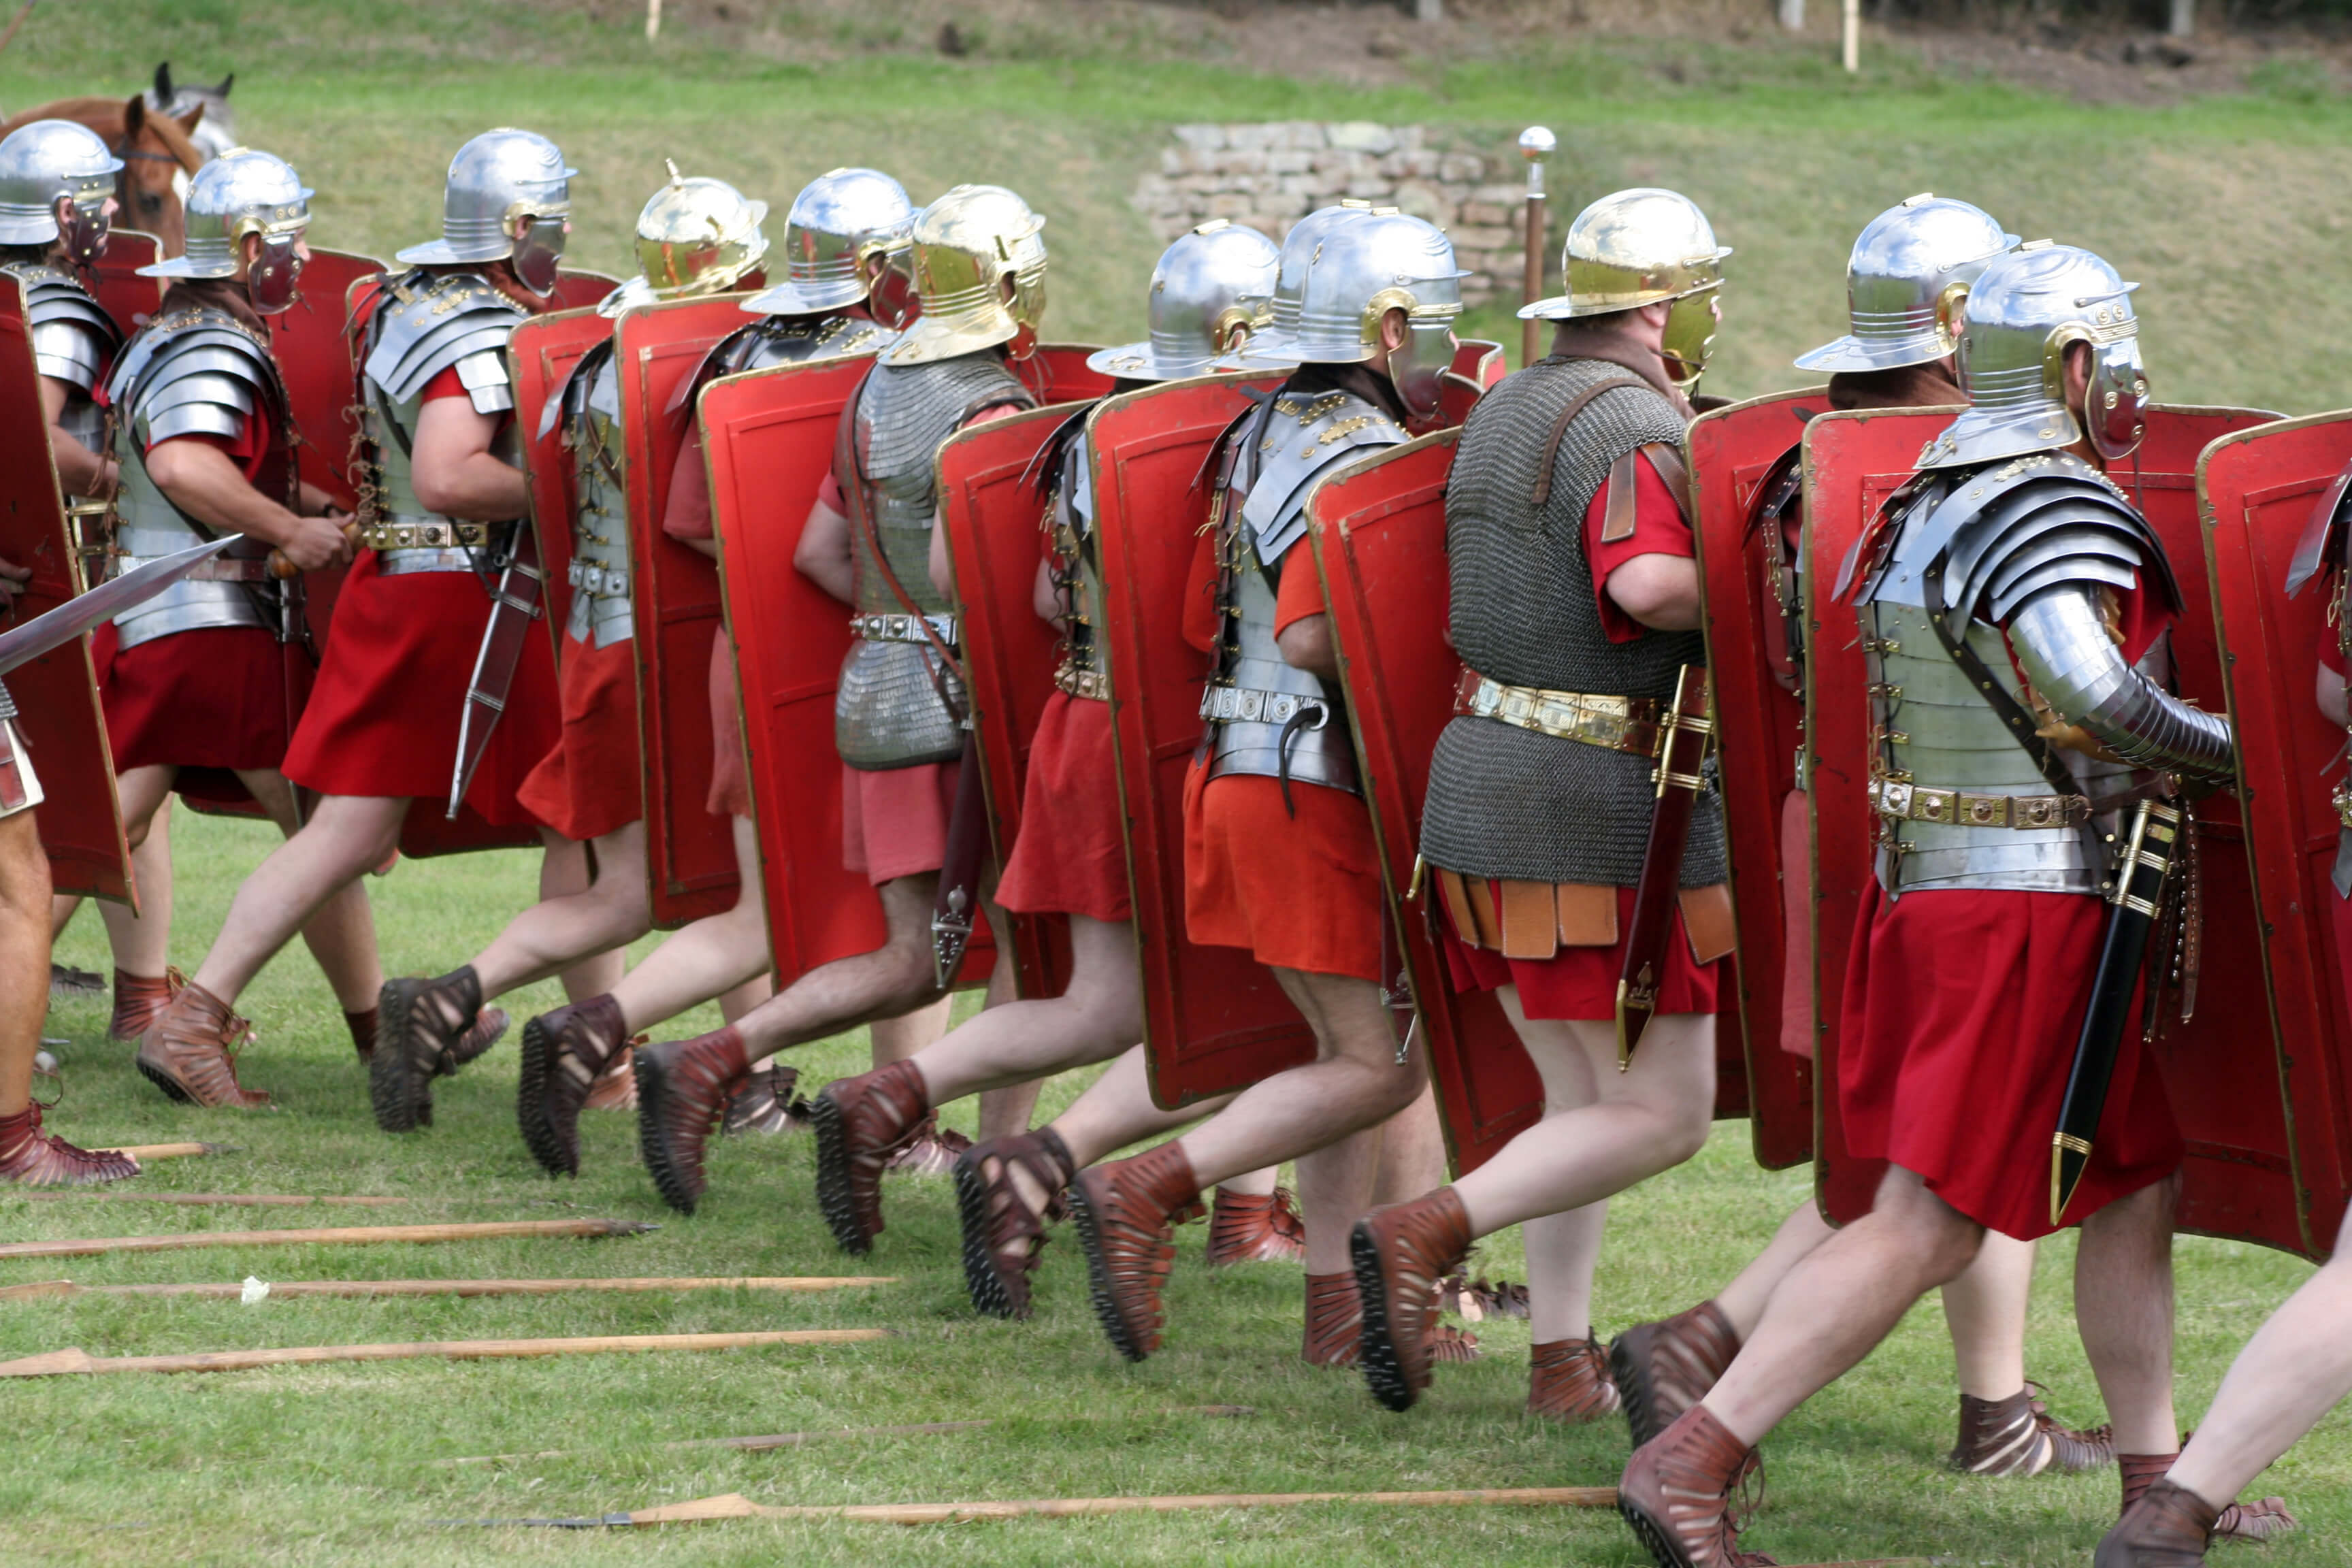 Actors dressed as Roman soldiers during battle. Illustration: shutterstock